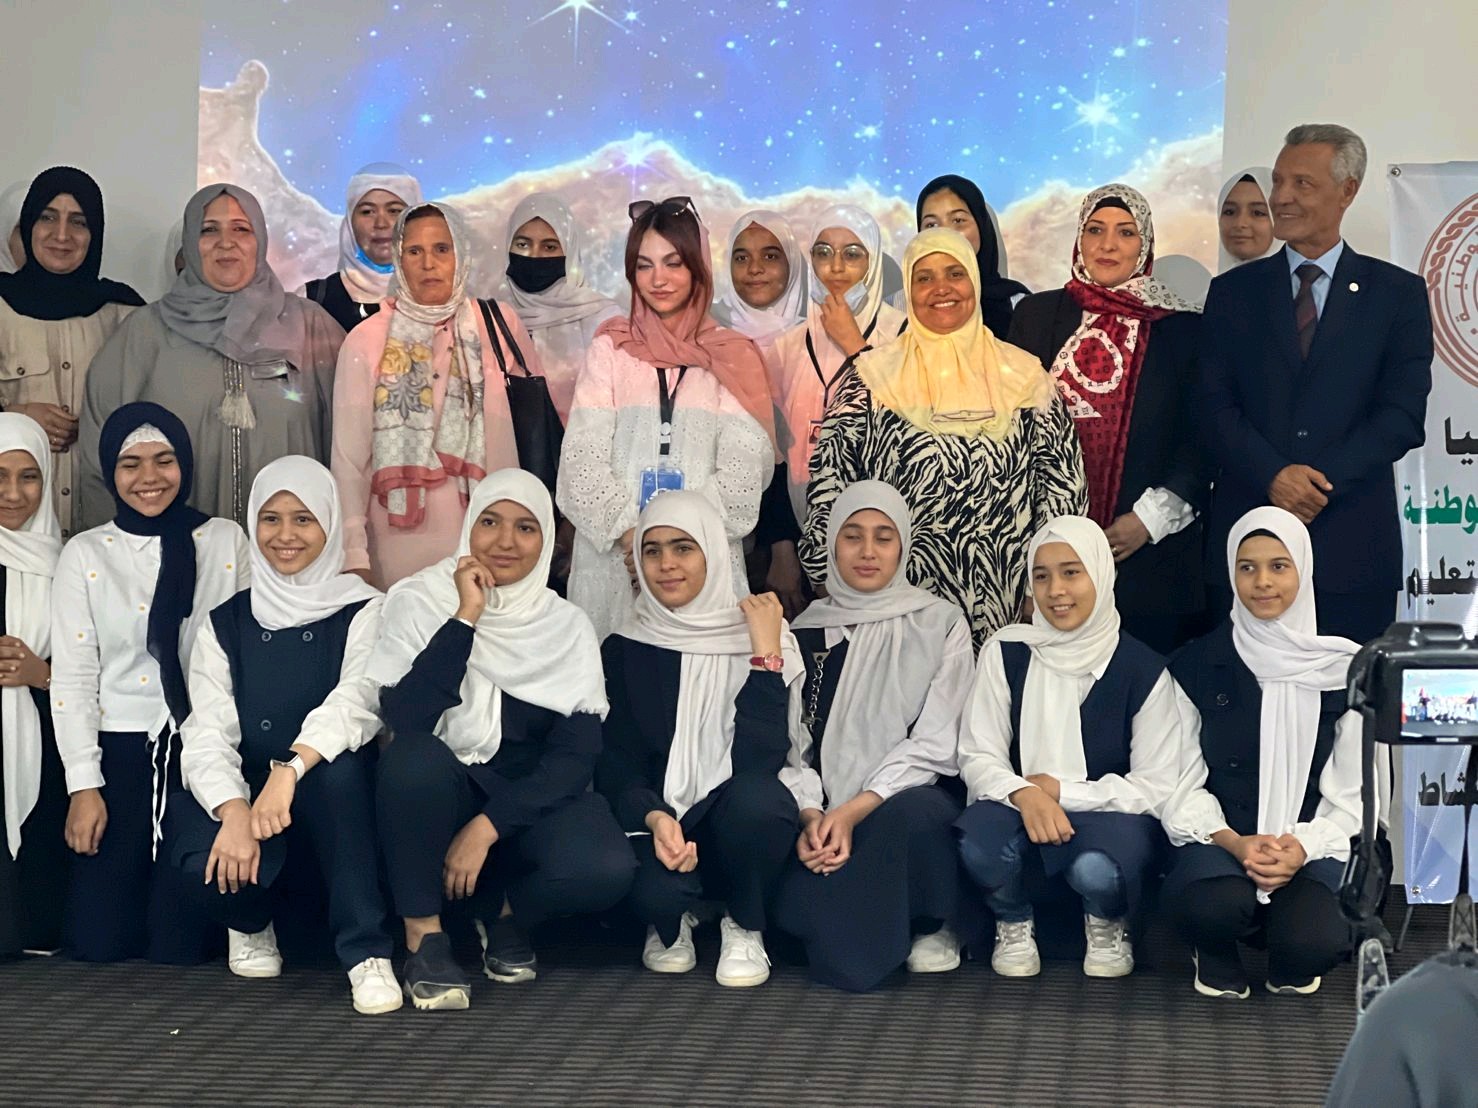 Twenty-three Libyan women and girls with head coverings and a Libyan man in a suit pose for a photo. Behind them is a backdrop with a nebula and galaxies.